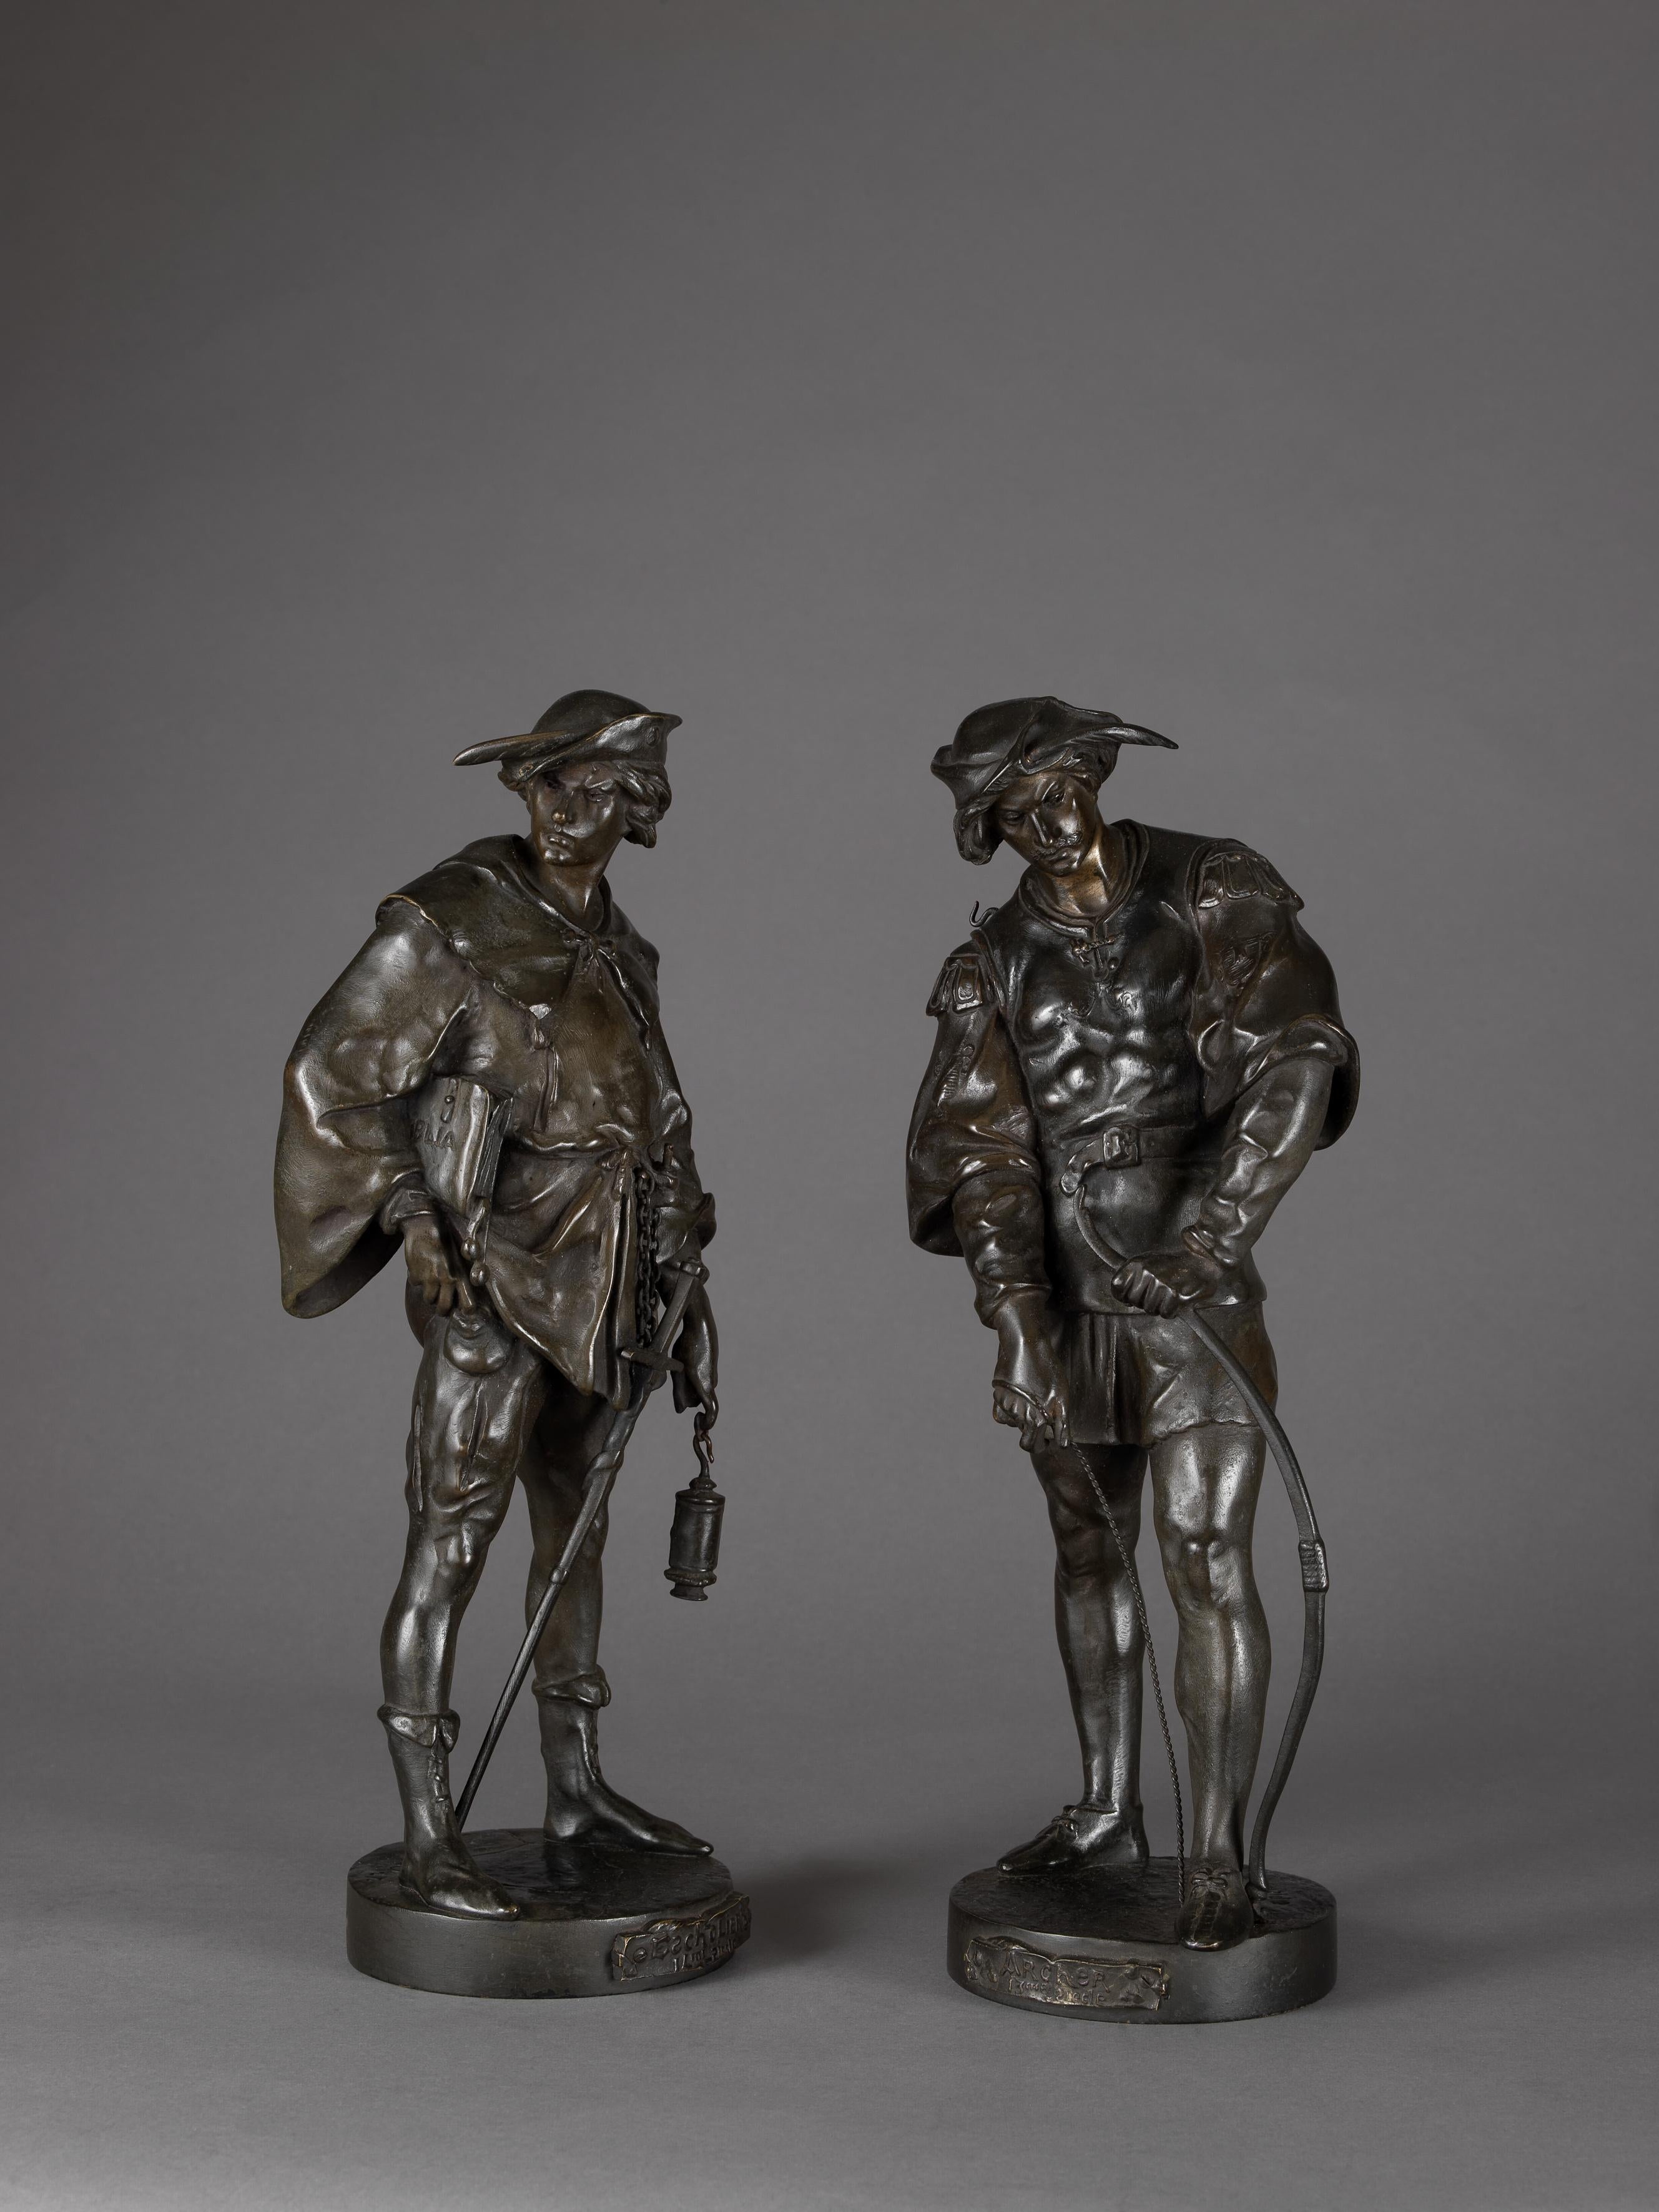 A fine pair of patinated bronze figures of an archer and a scholar by Émile Louis Picault.

French, circa 1890.

Cast signature to each base 'E PICAULT'. 

This fine pair of bronze figures depicts a scholar and an Archer. 

The scholar